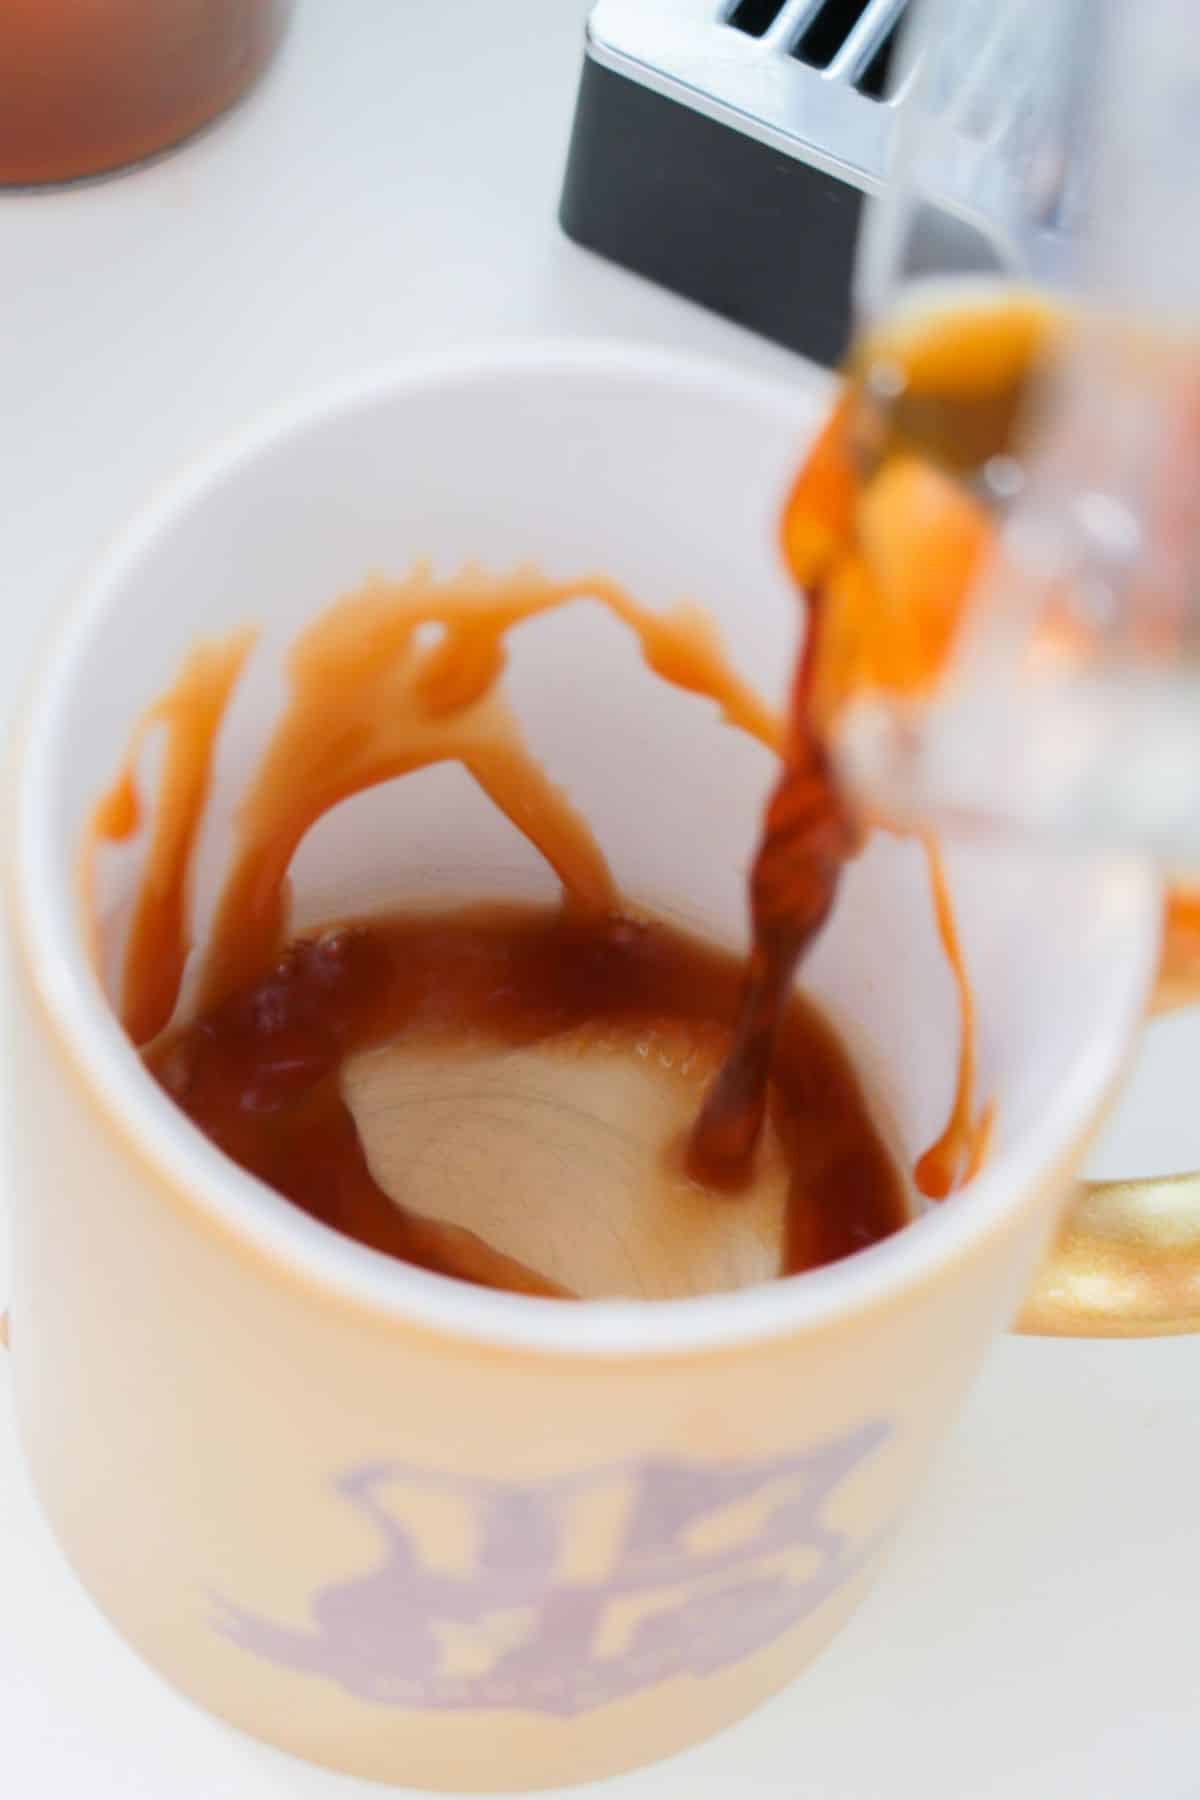 The caramel sauce is being drizzled into the mug.